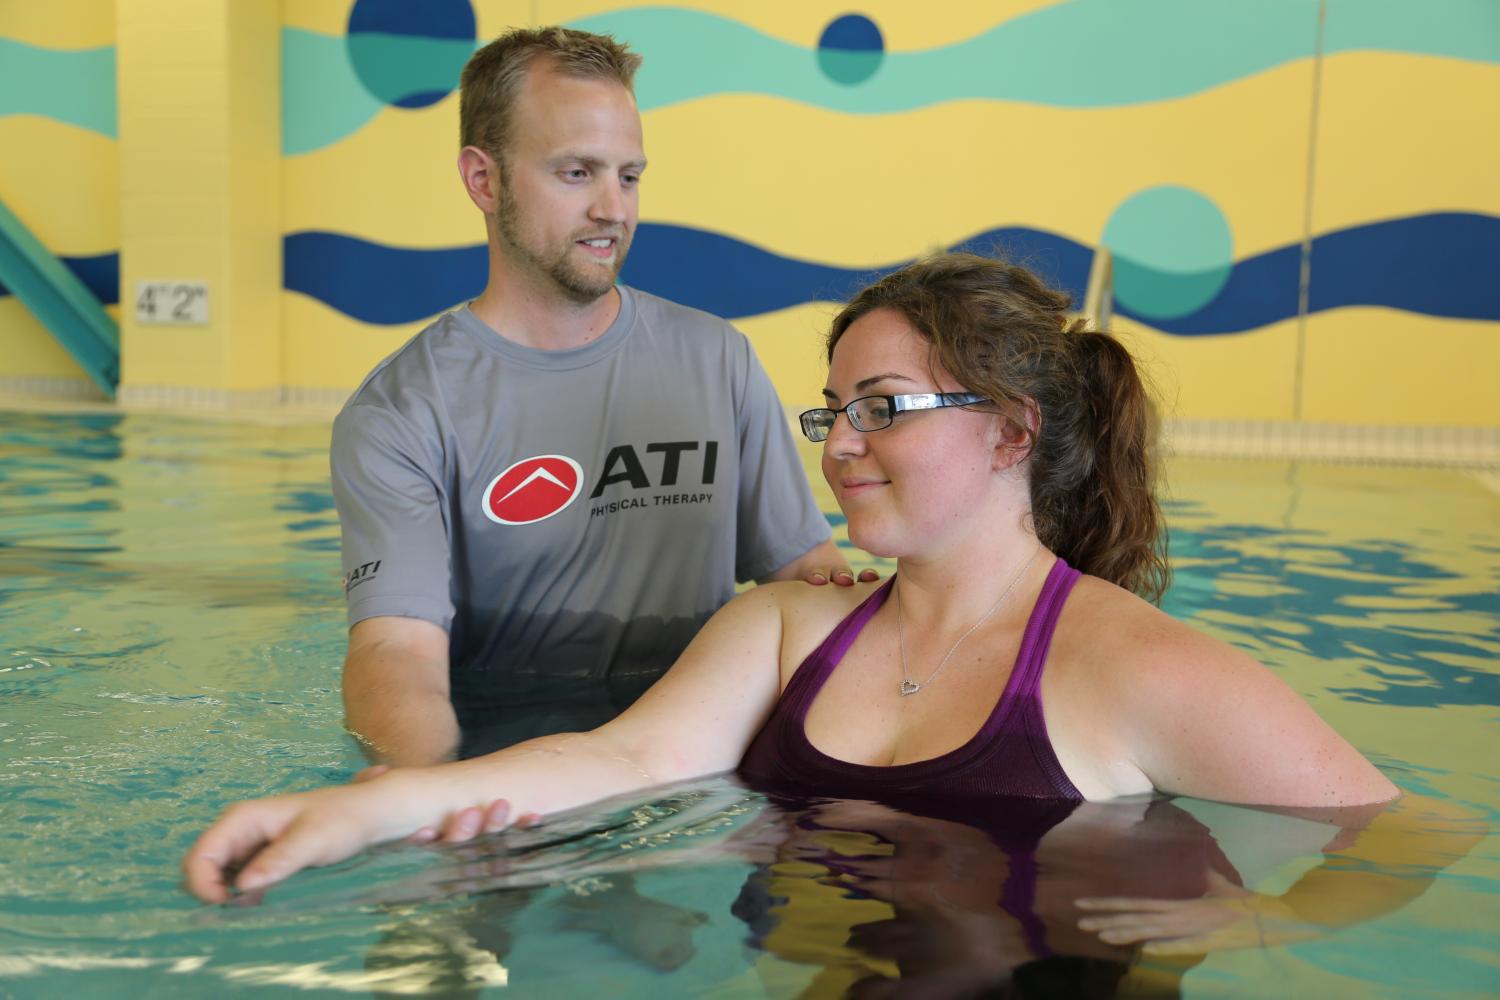 Hydrotherapy Aquatic Physical Therapy Ati